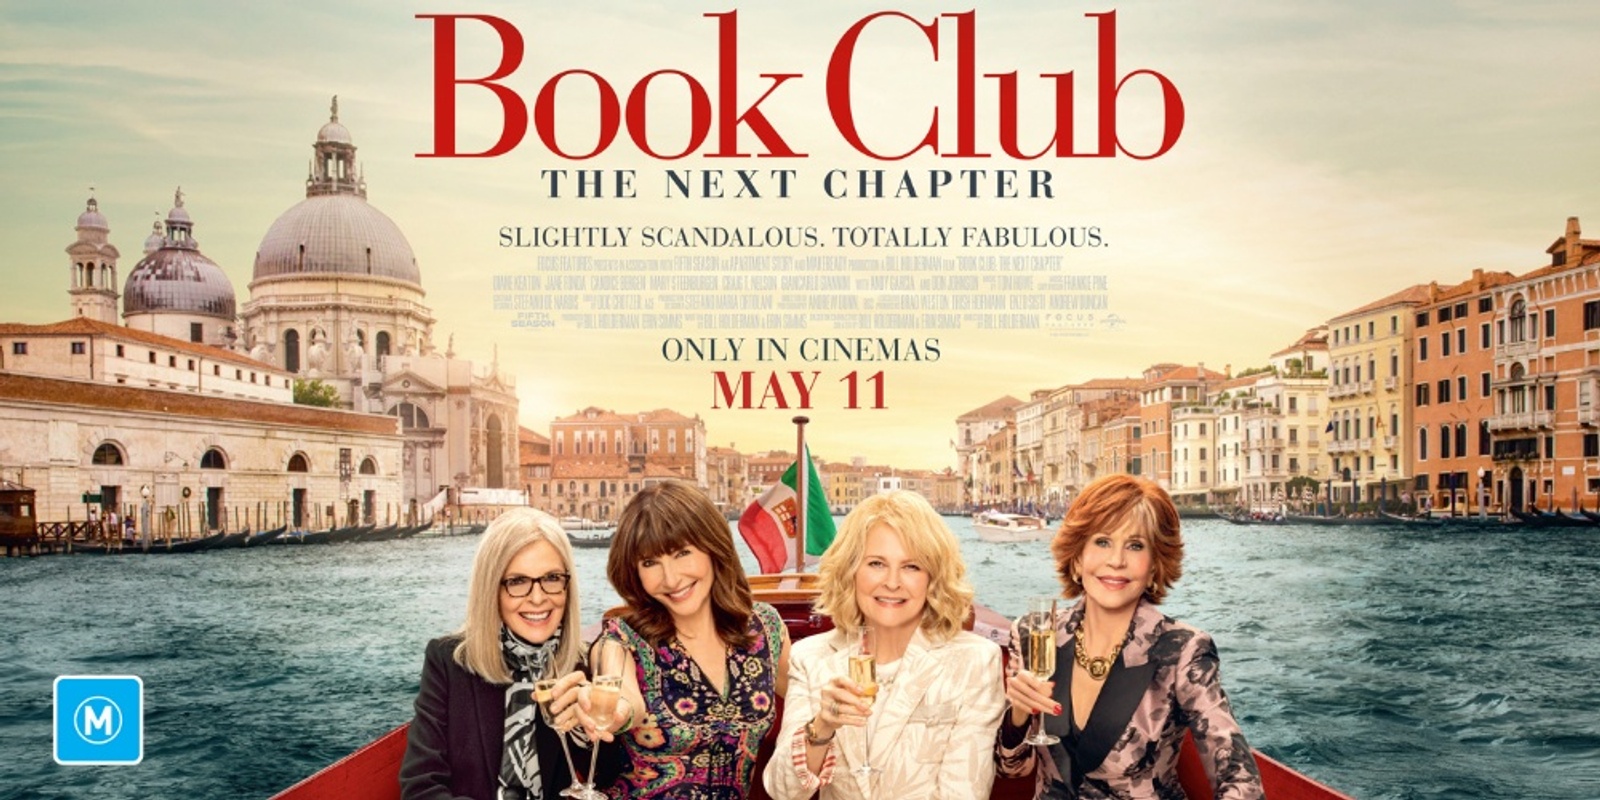 Book Club 2: The Next Chapter [M]